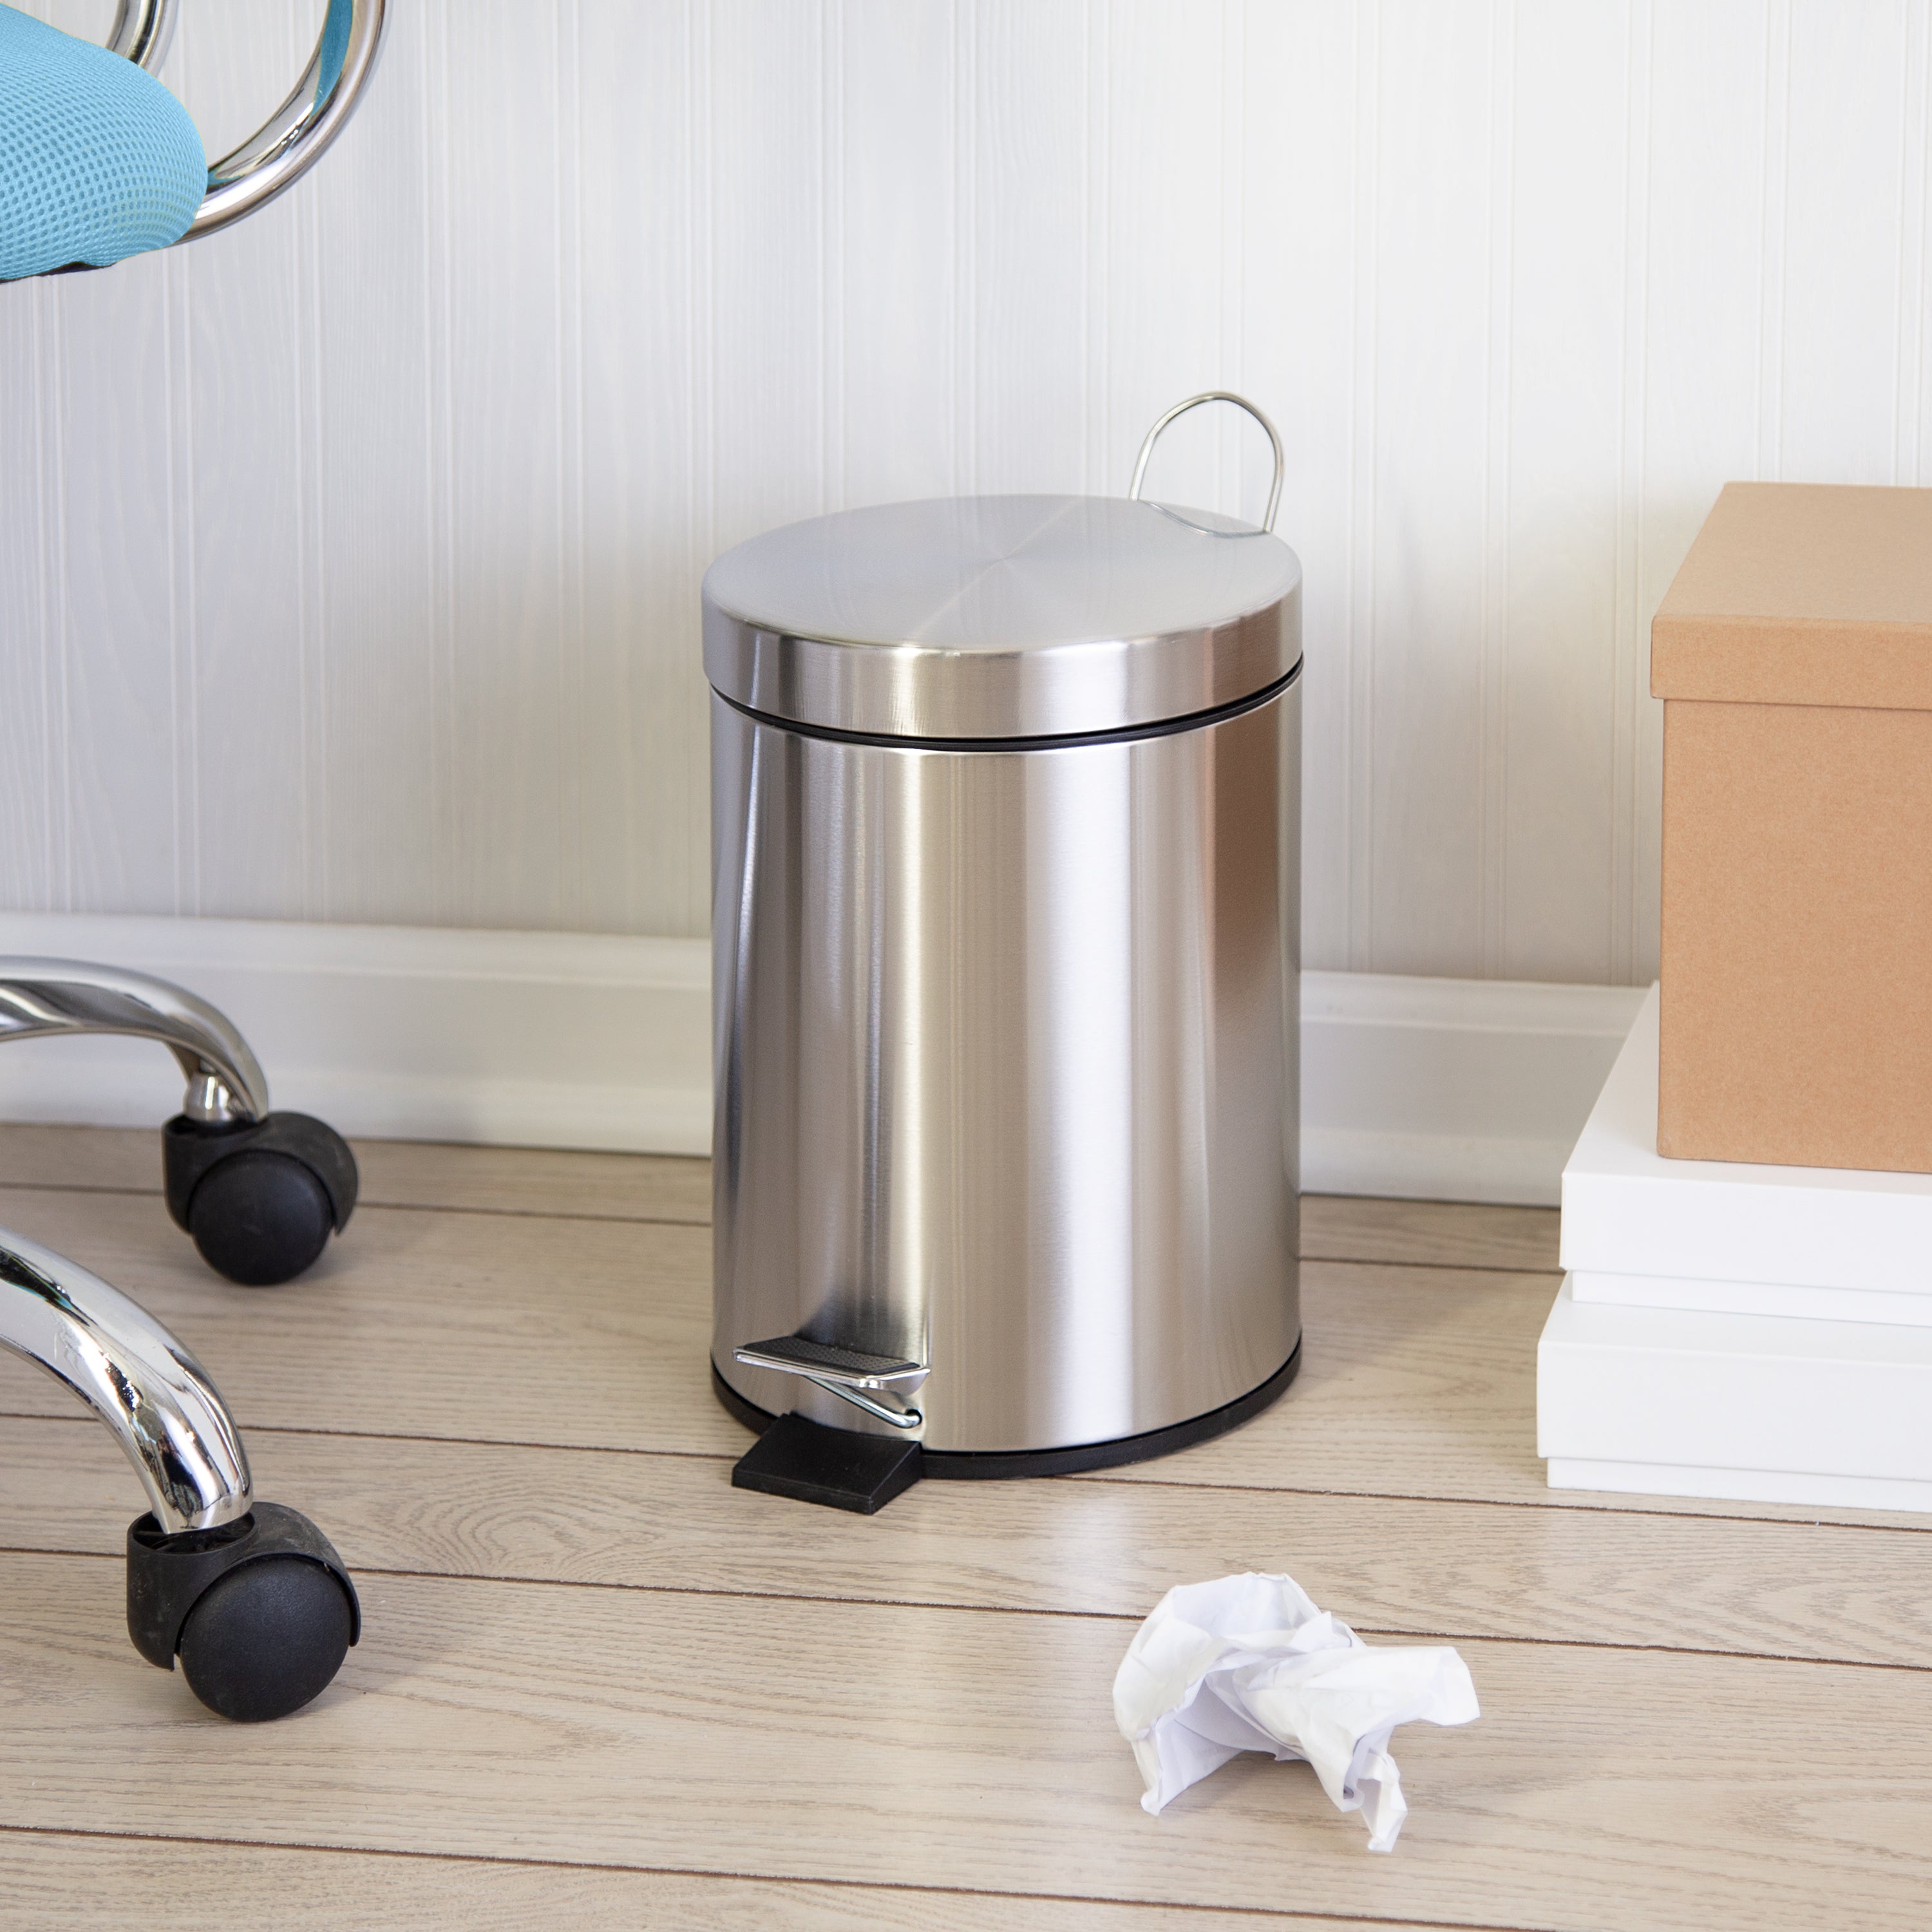 at Home 30L Stainless Steel Trash Can with Bonus 5L Trash Bin